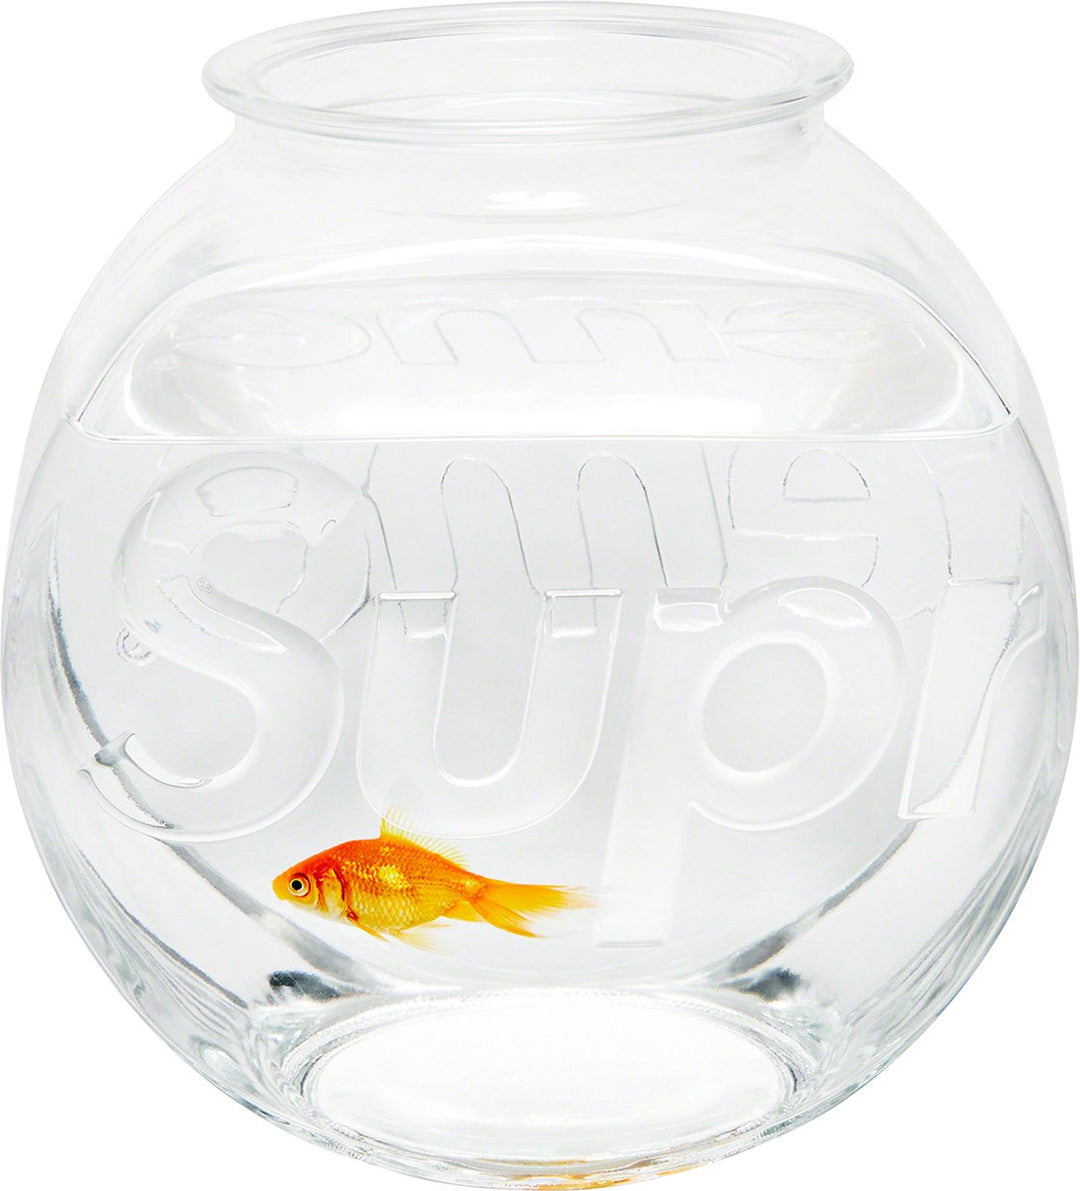 Supreme Fish Bowl Clear | Hype Vault Kuala Lumpur | Asia's Top Trusted High-End Sneakers and Streetwear Store